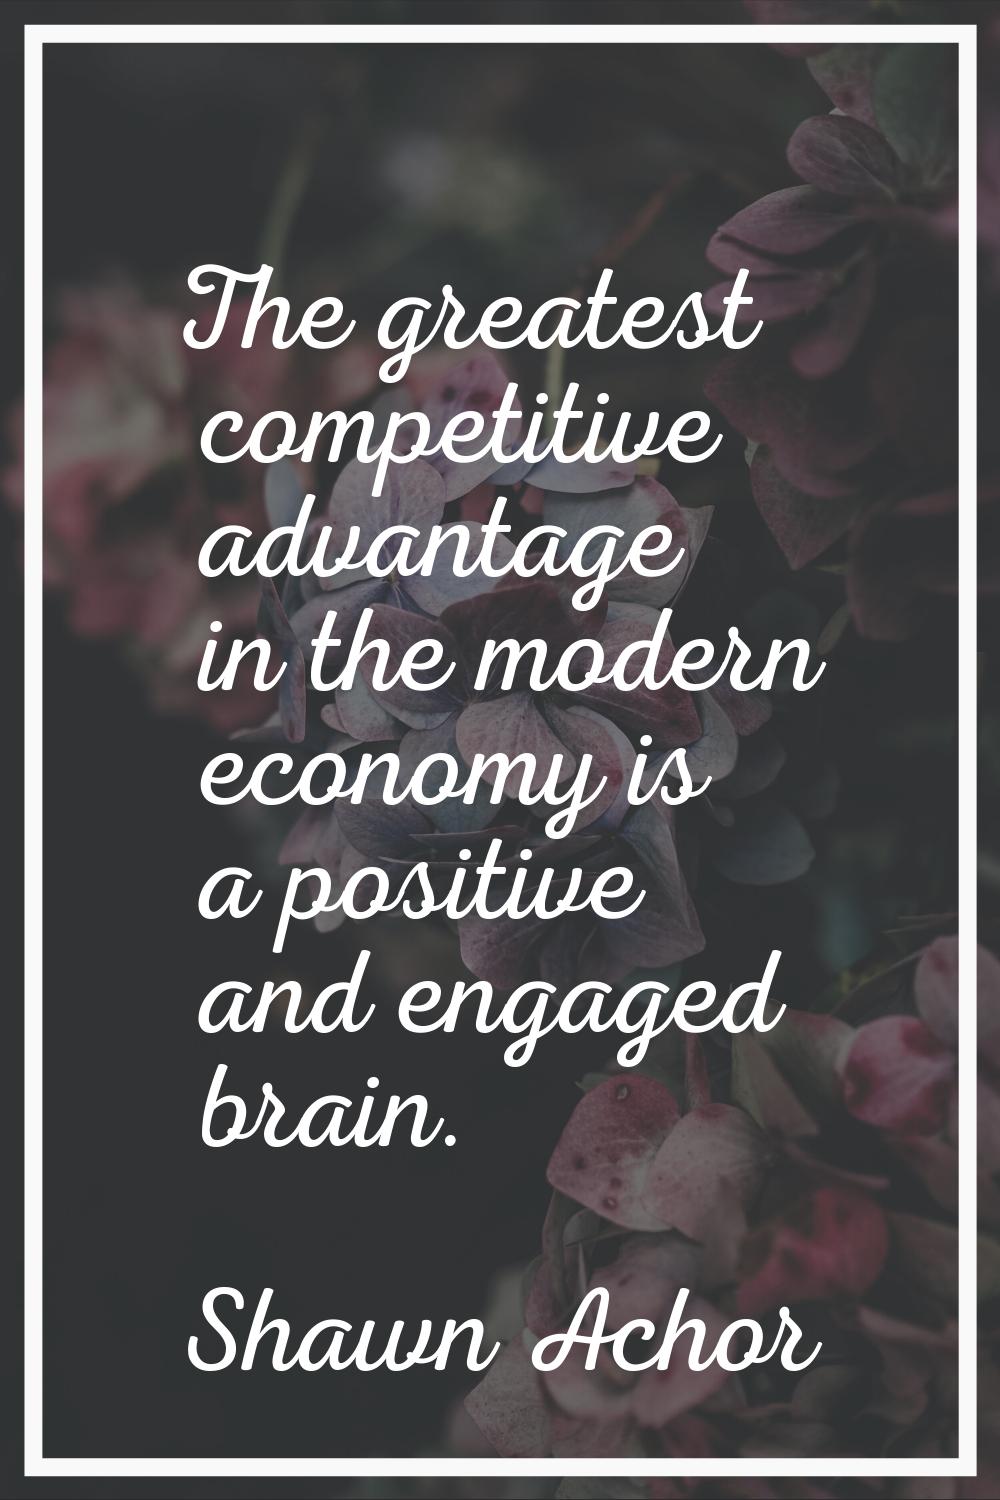 The greatest competitive advantage in the modern economy is a positive and engaged brain.